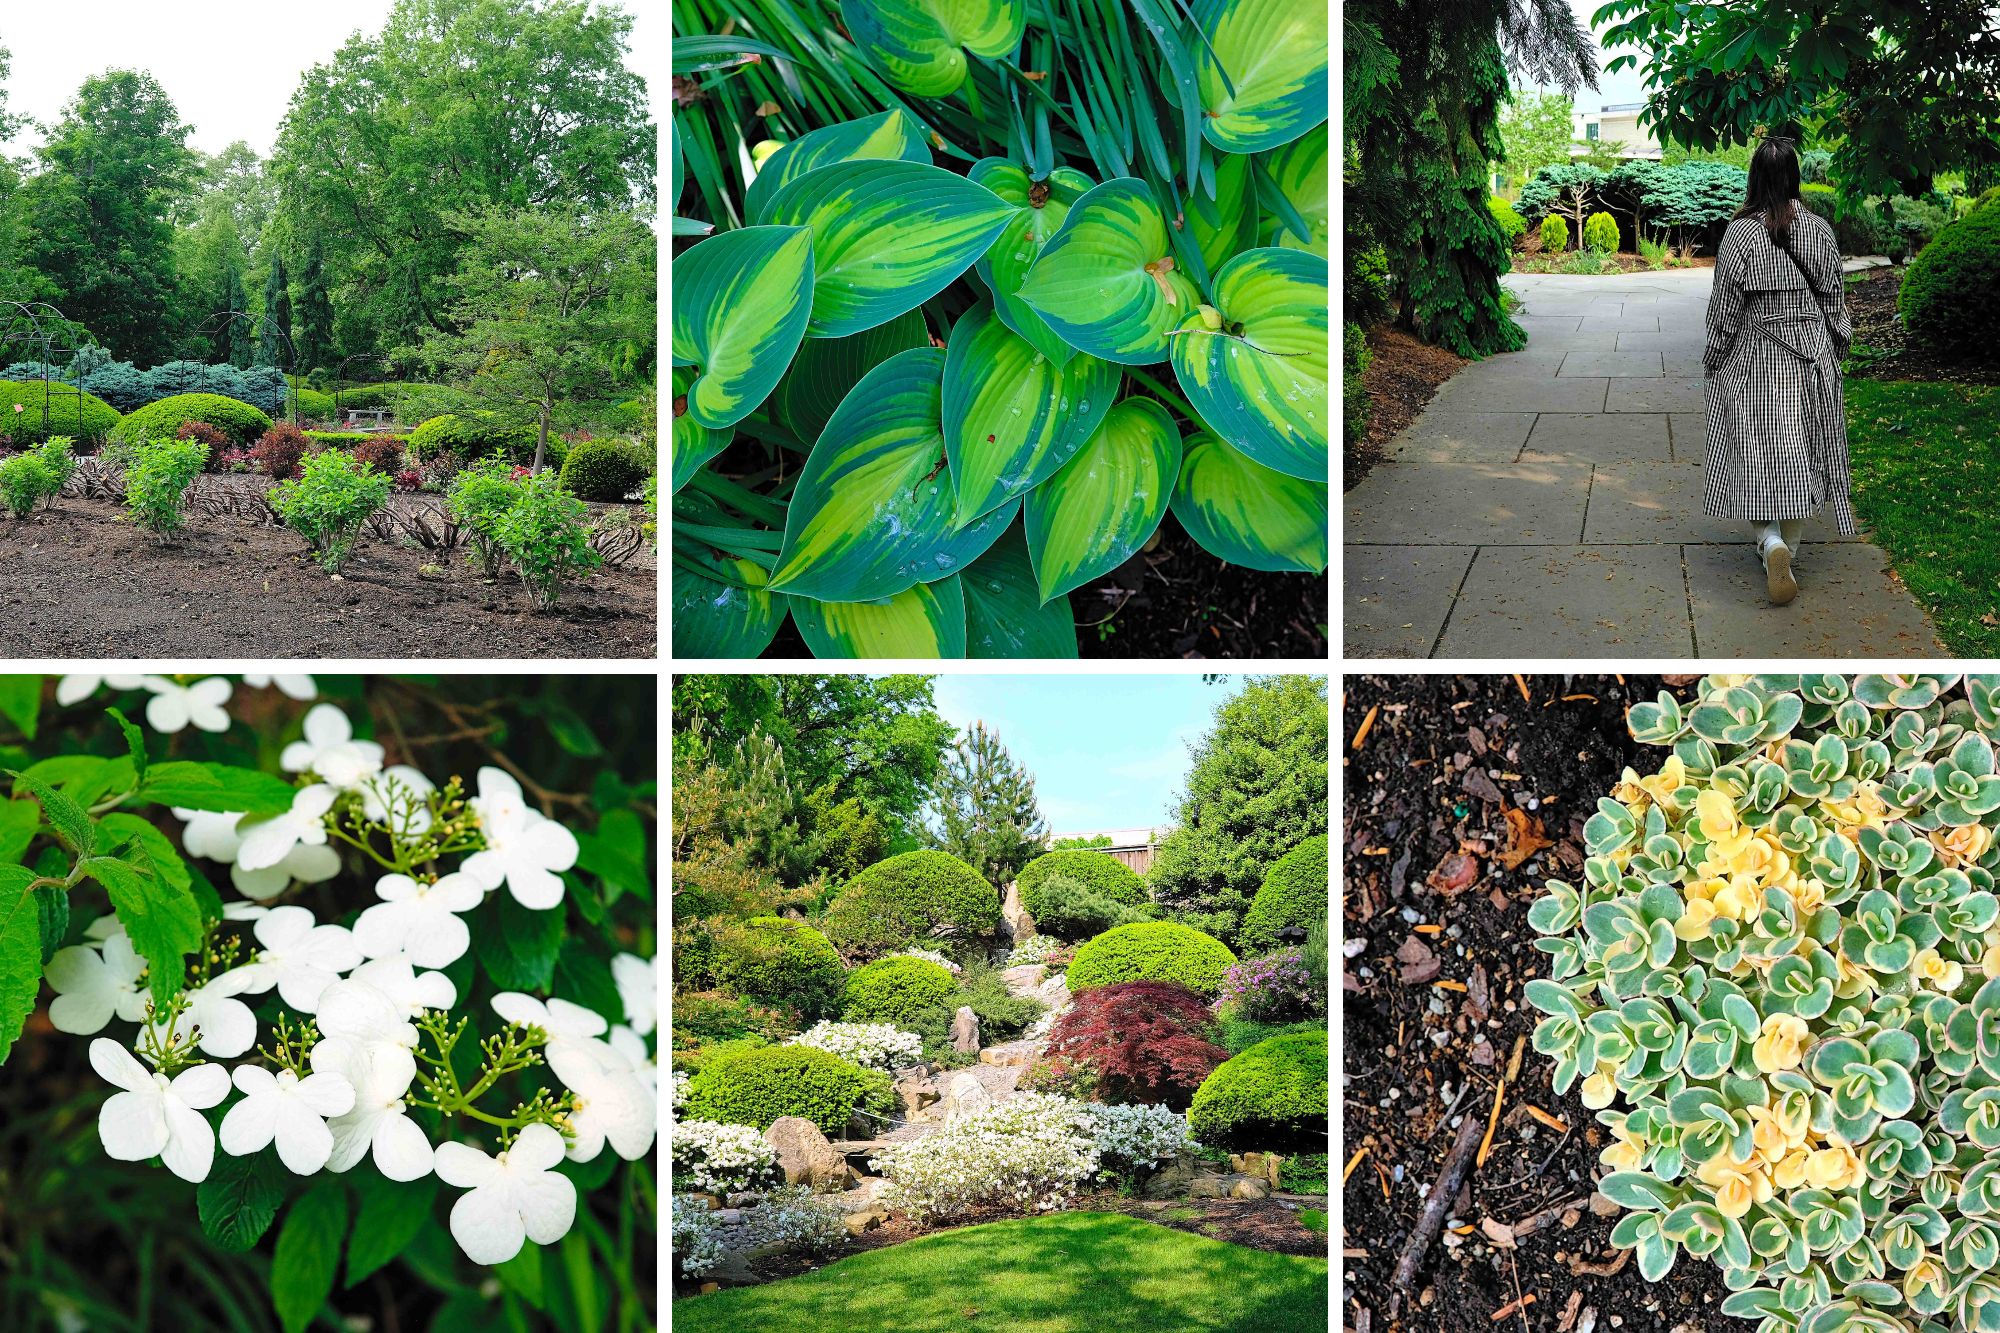 A collage of images taken in the botanical gardens